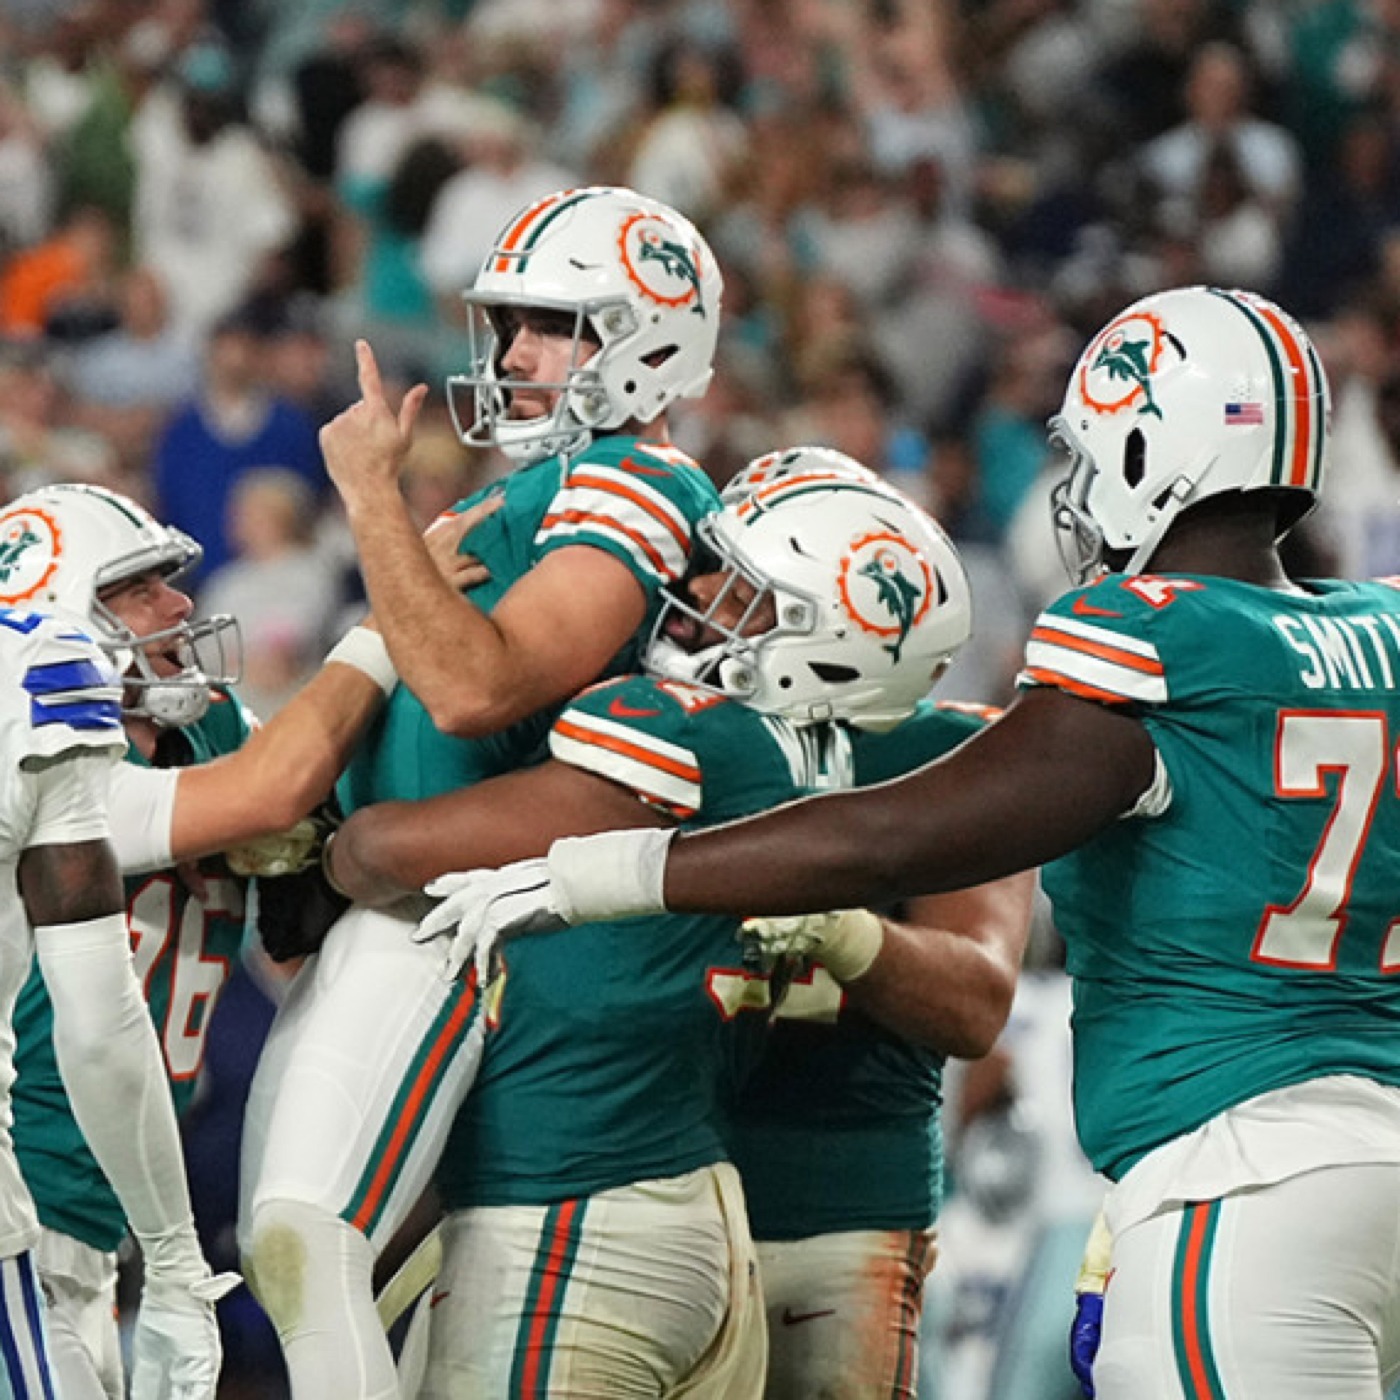 Sanders Stuff The Dolphins Stockings!